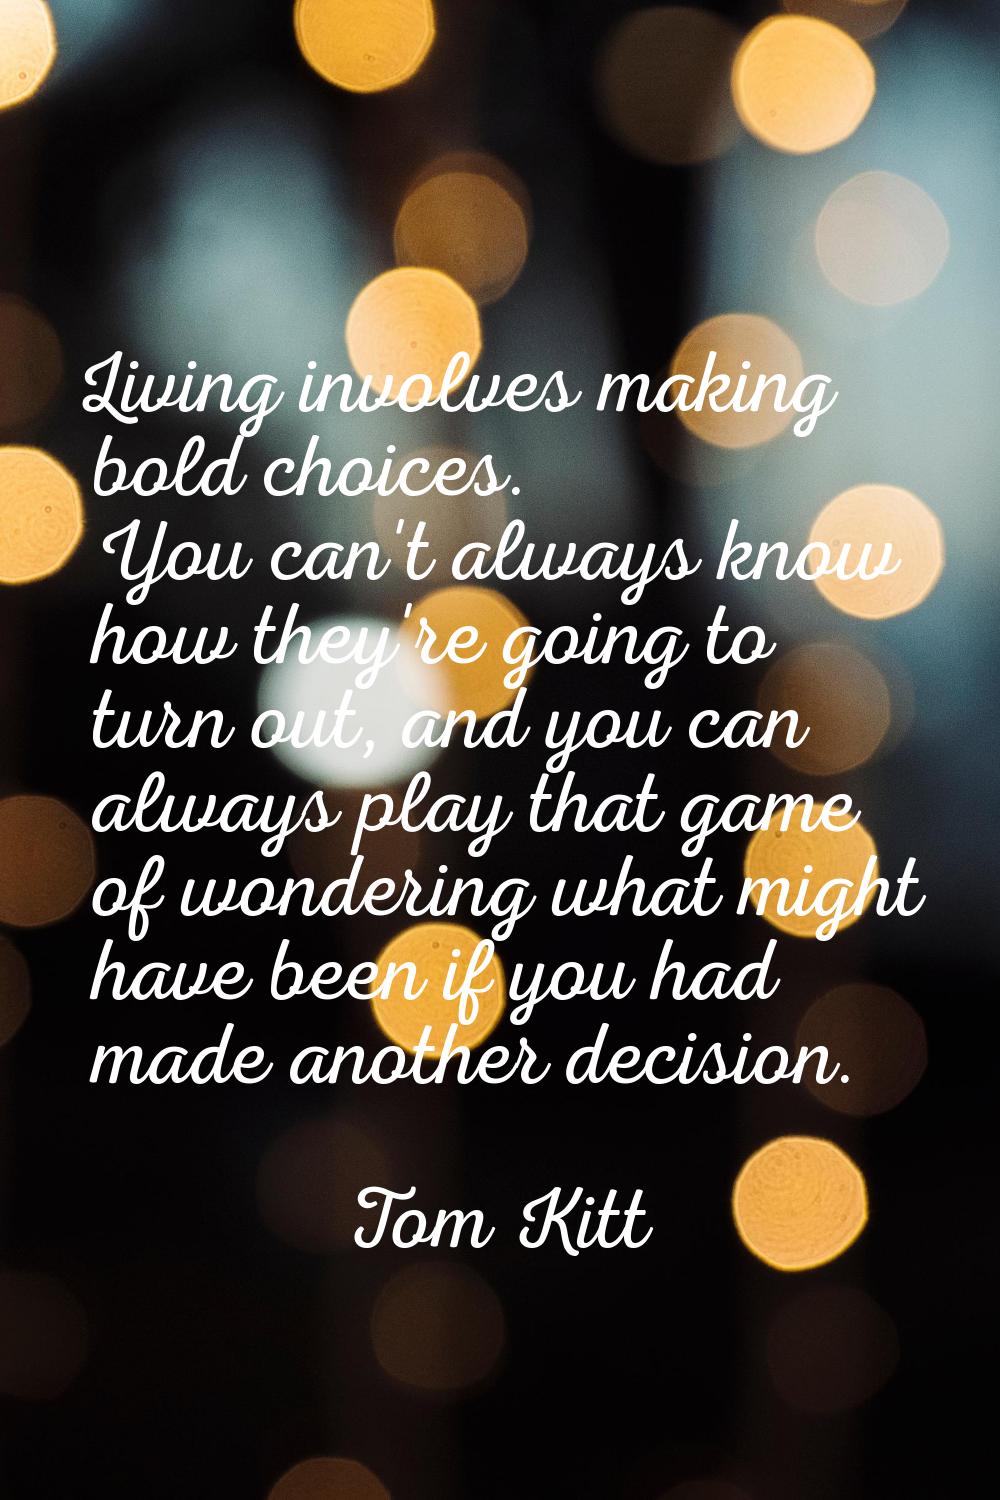 Living involves making bold choices. You can't always know how they're going to turn out, and you c